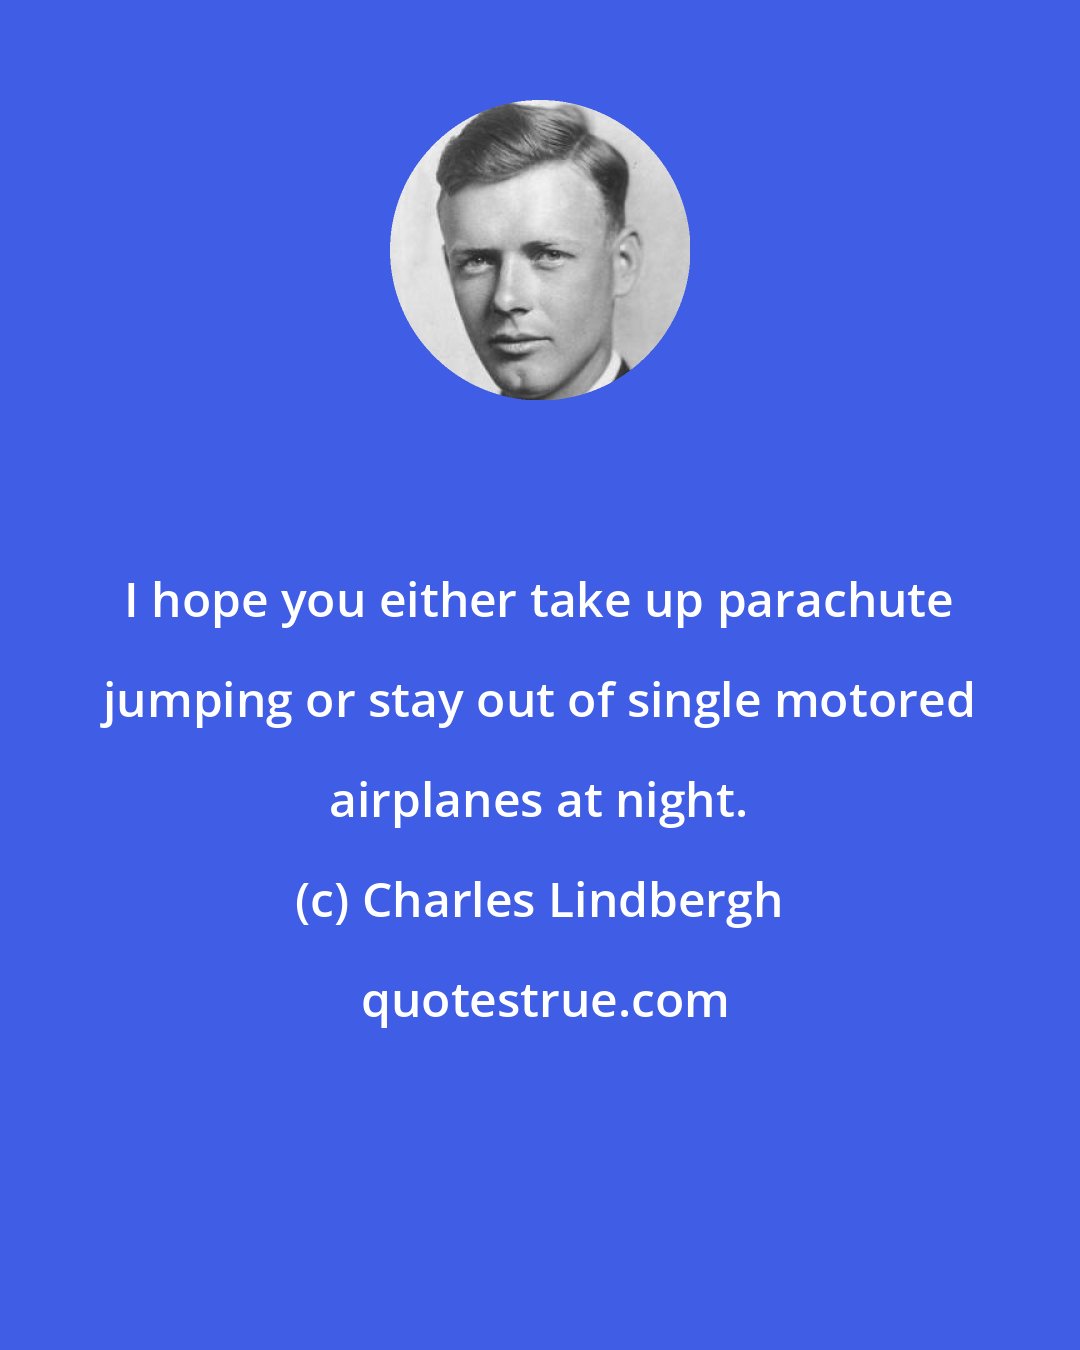 Charles Lindbergh: I hope you either take up parachute jumping or stay out of single motored airplanes at night.